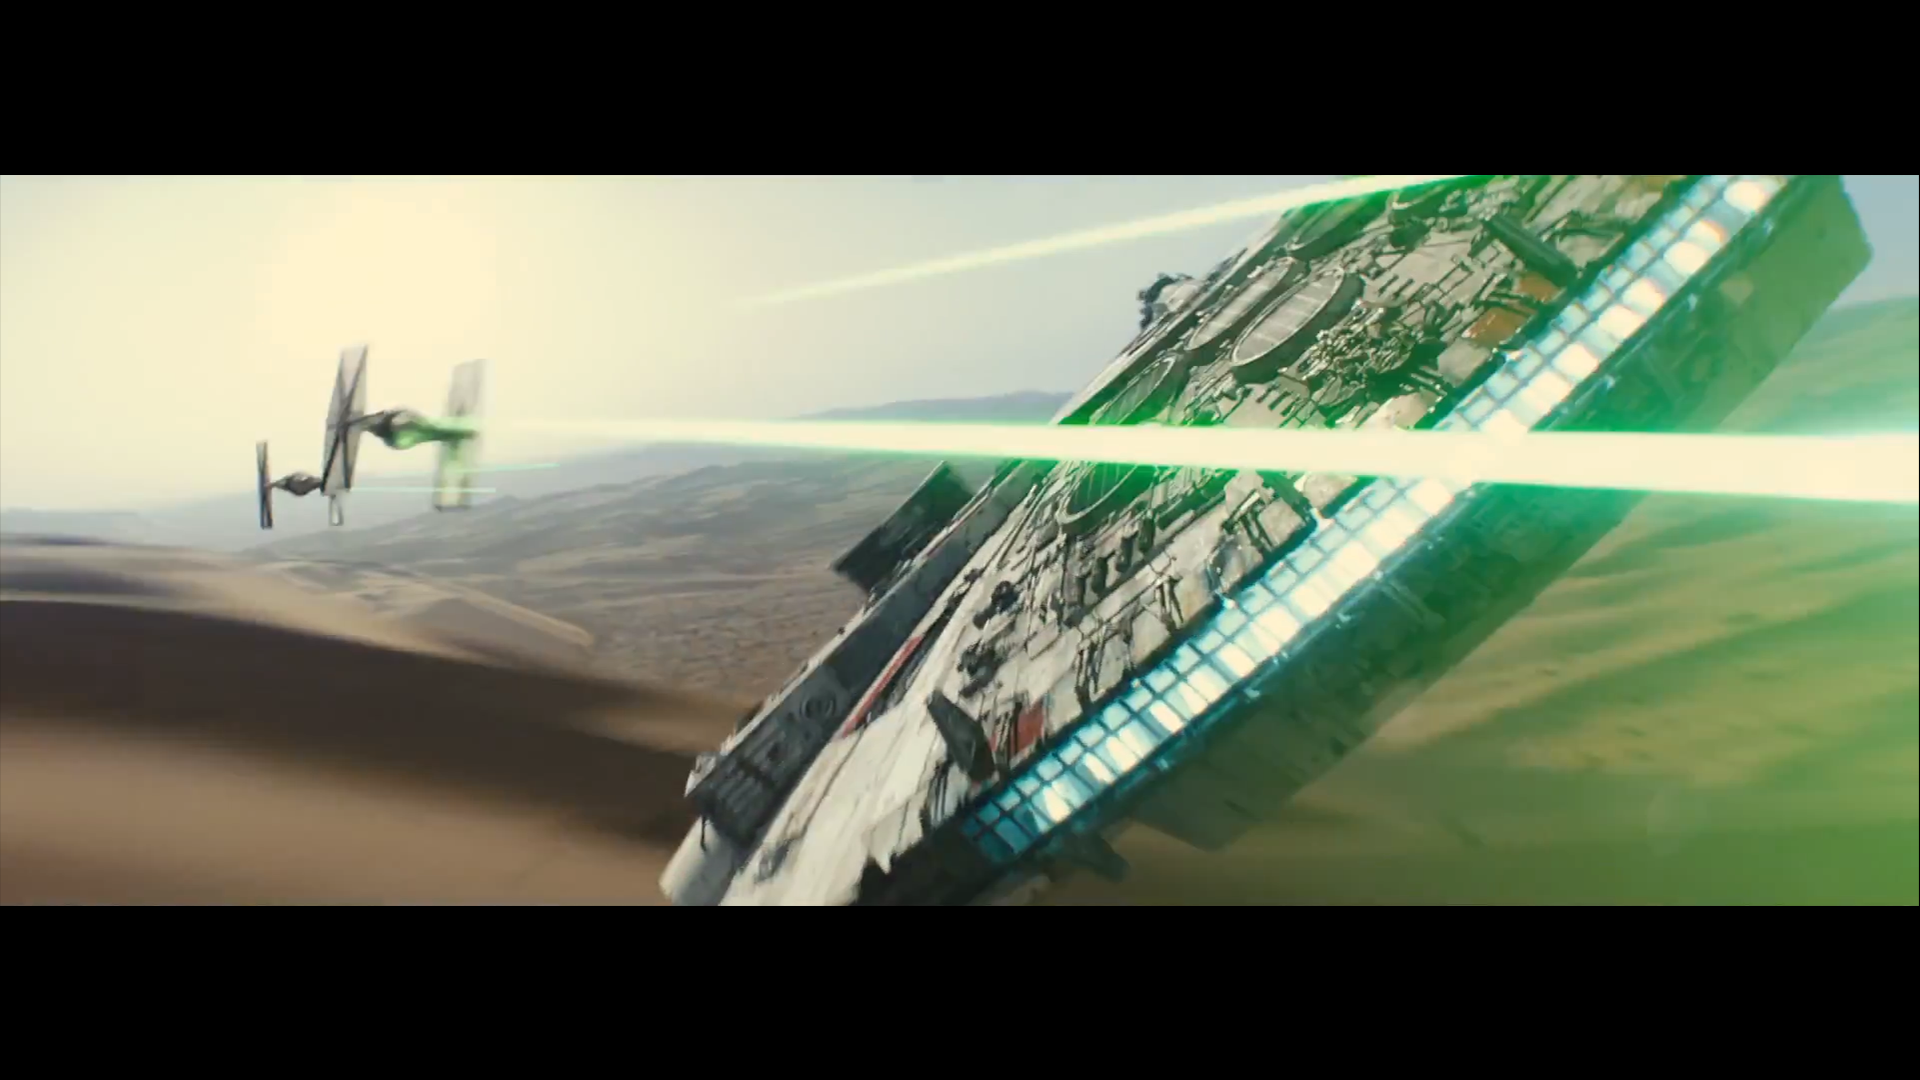 Took a frame from the Star Wars Episode VII trailer 1920x1080